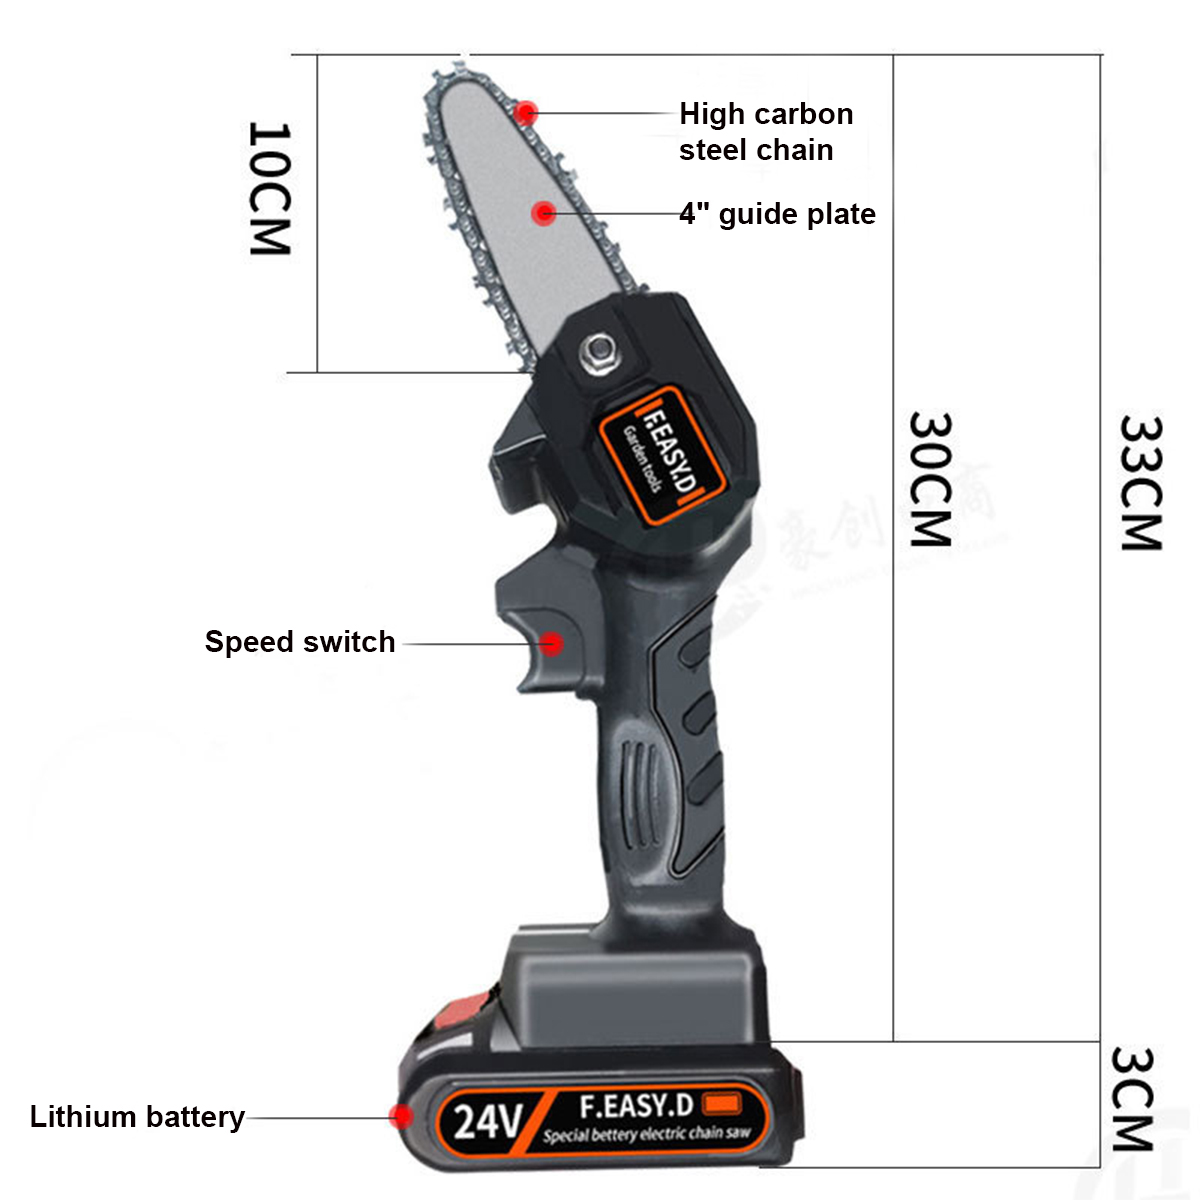 24V-Rechargeable-Cordless-Electric-Saw-Portable-Woodworking-Cutting-Tool-W-Battery-1788980-9